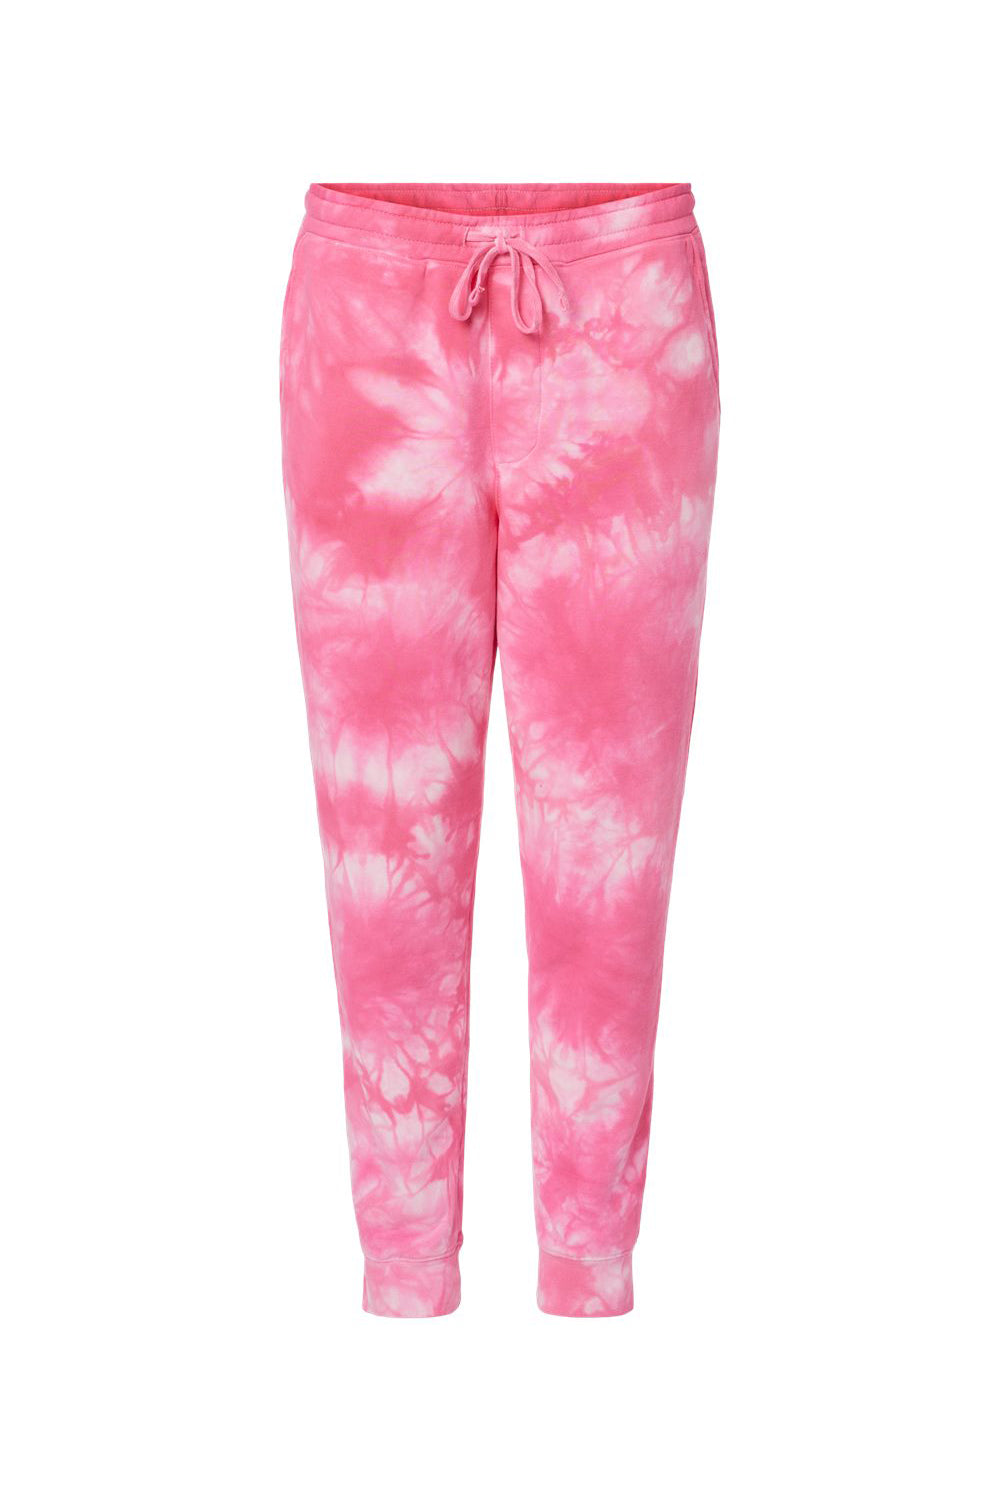 Independent Trading Co. PRM50PTTD Mens Tie-Dye Fleece Sweatpants w/ Pockets Pink Flat Front